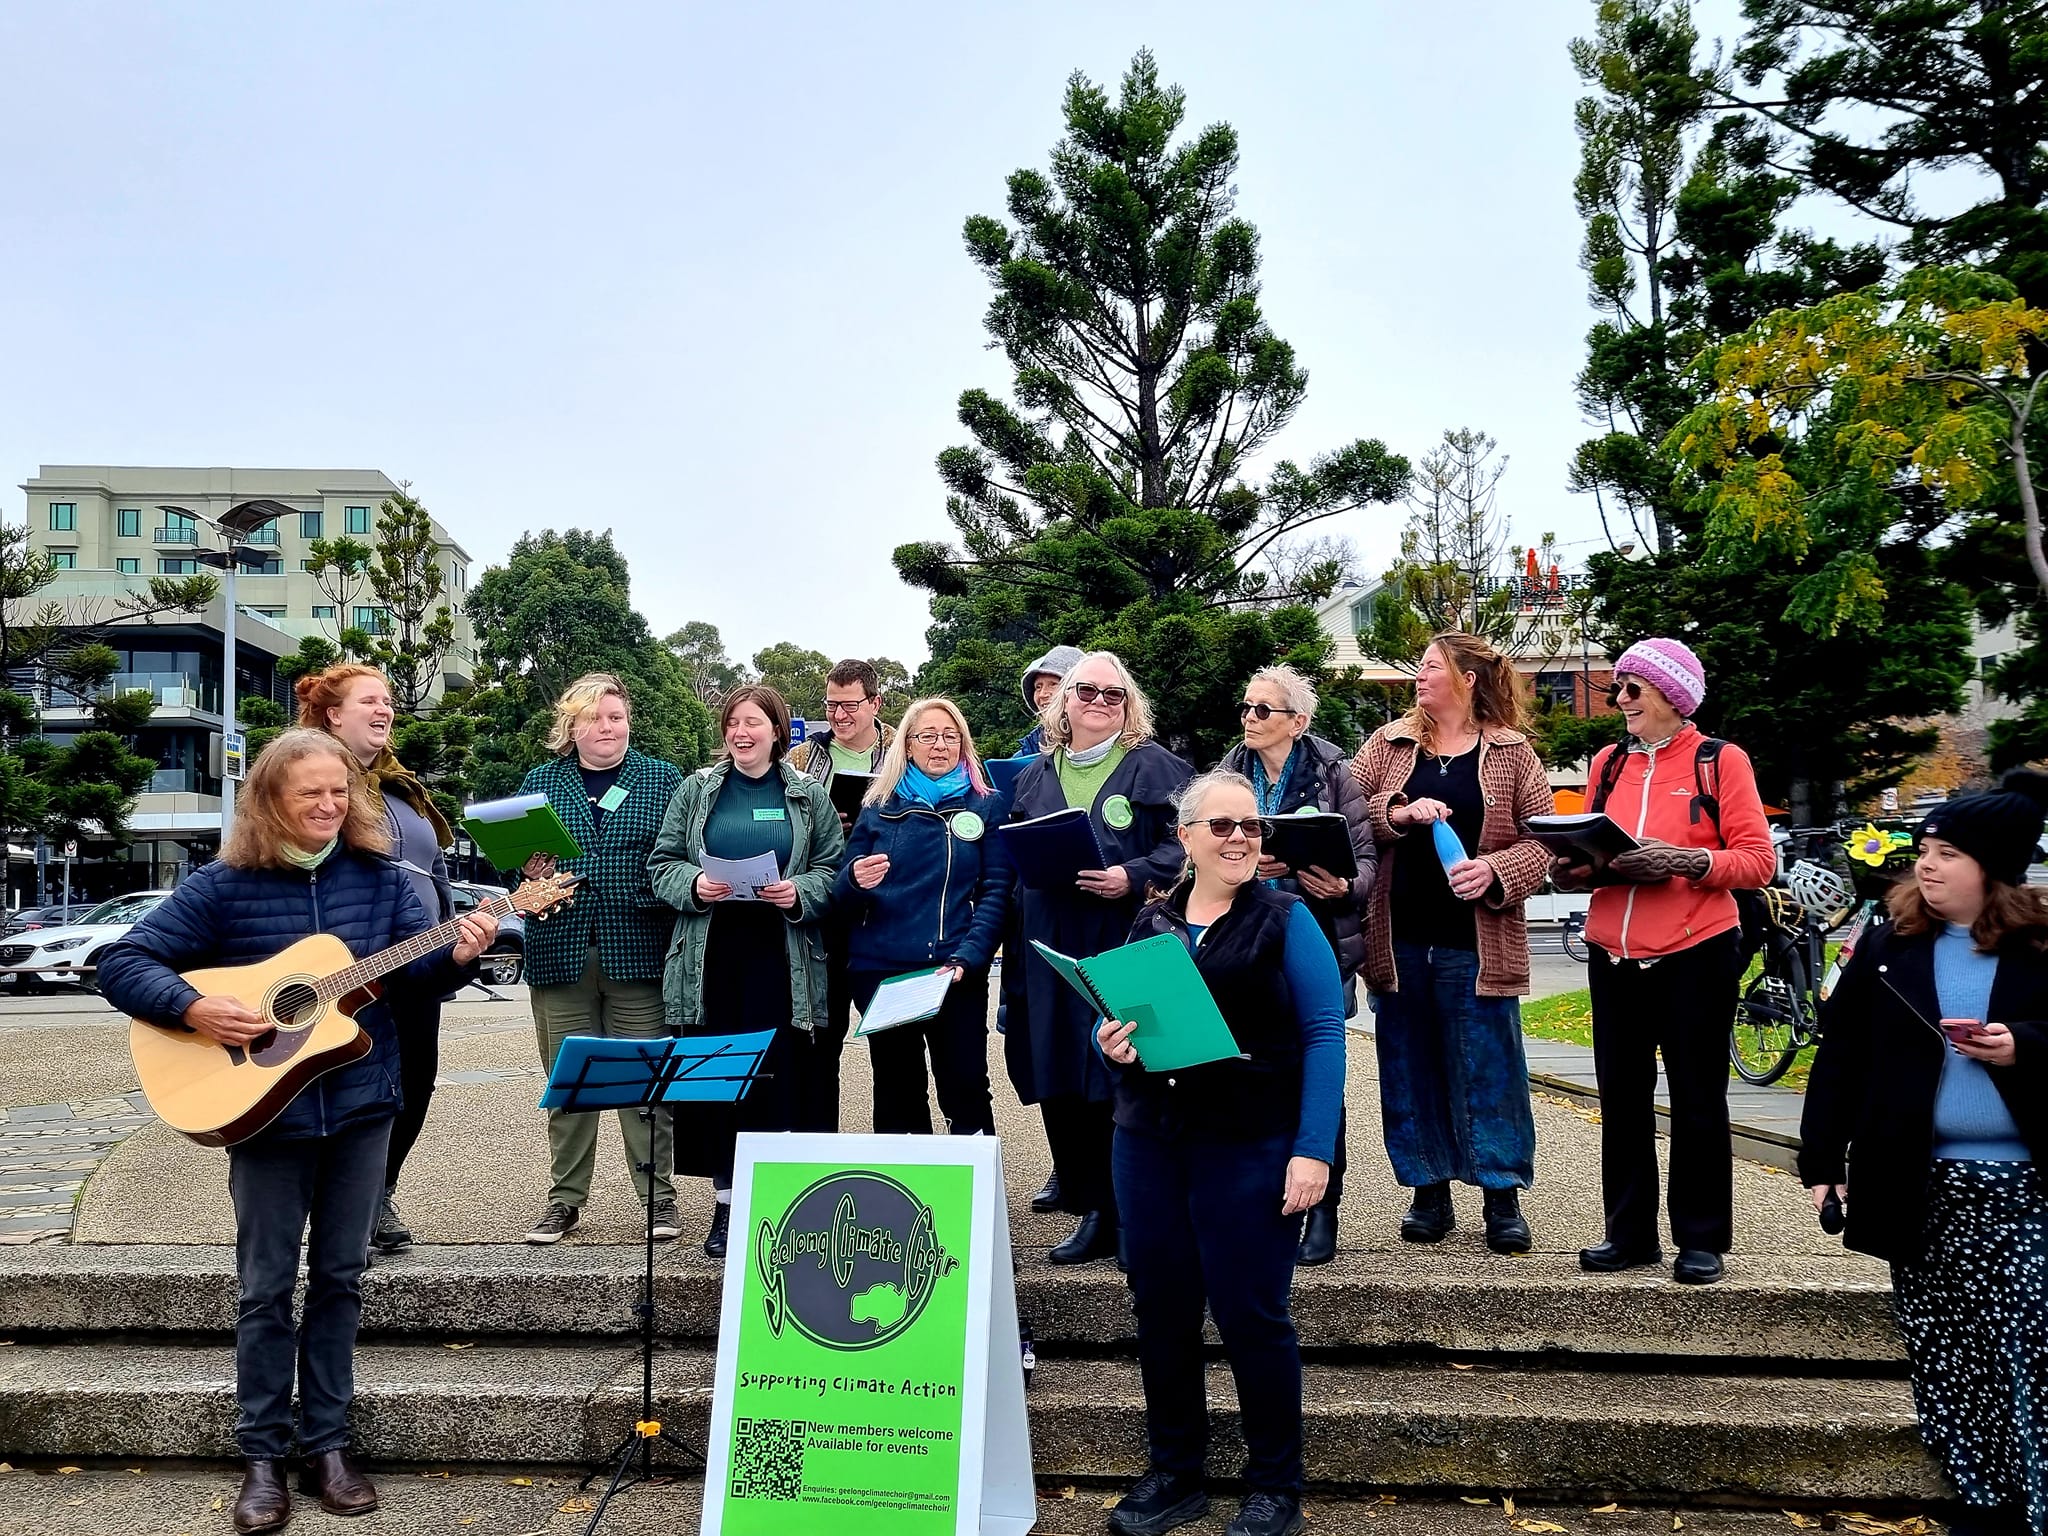 The Geelong Climate Choir performed at the rally. Photo: Angela Carr